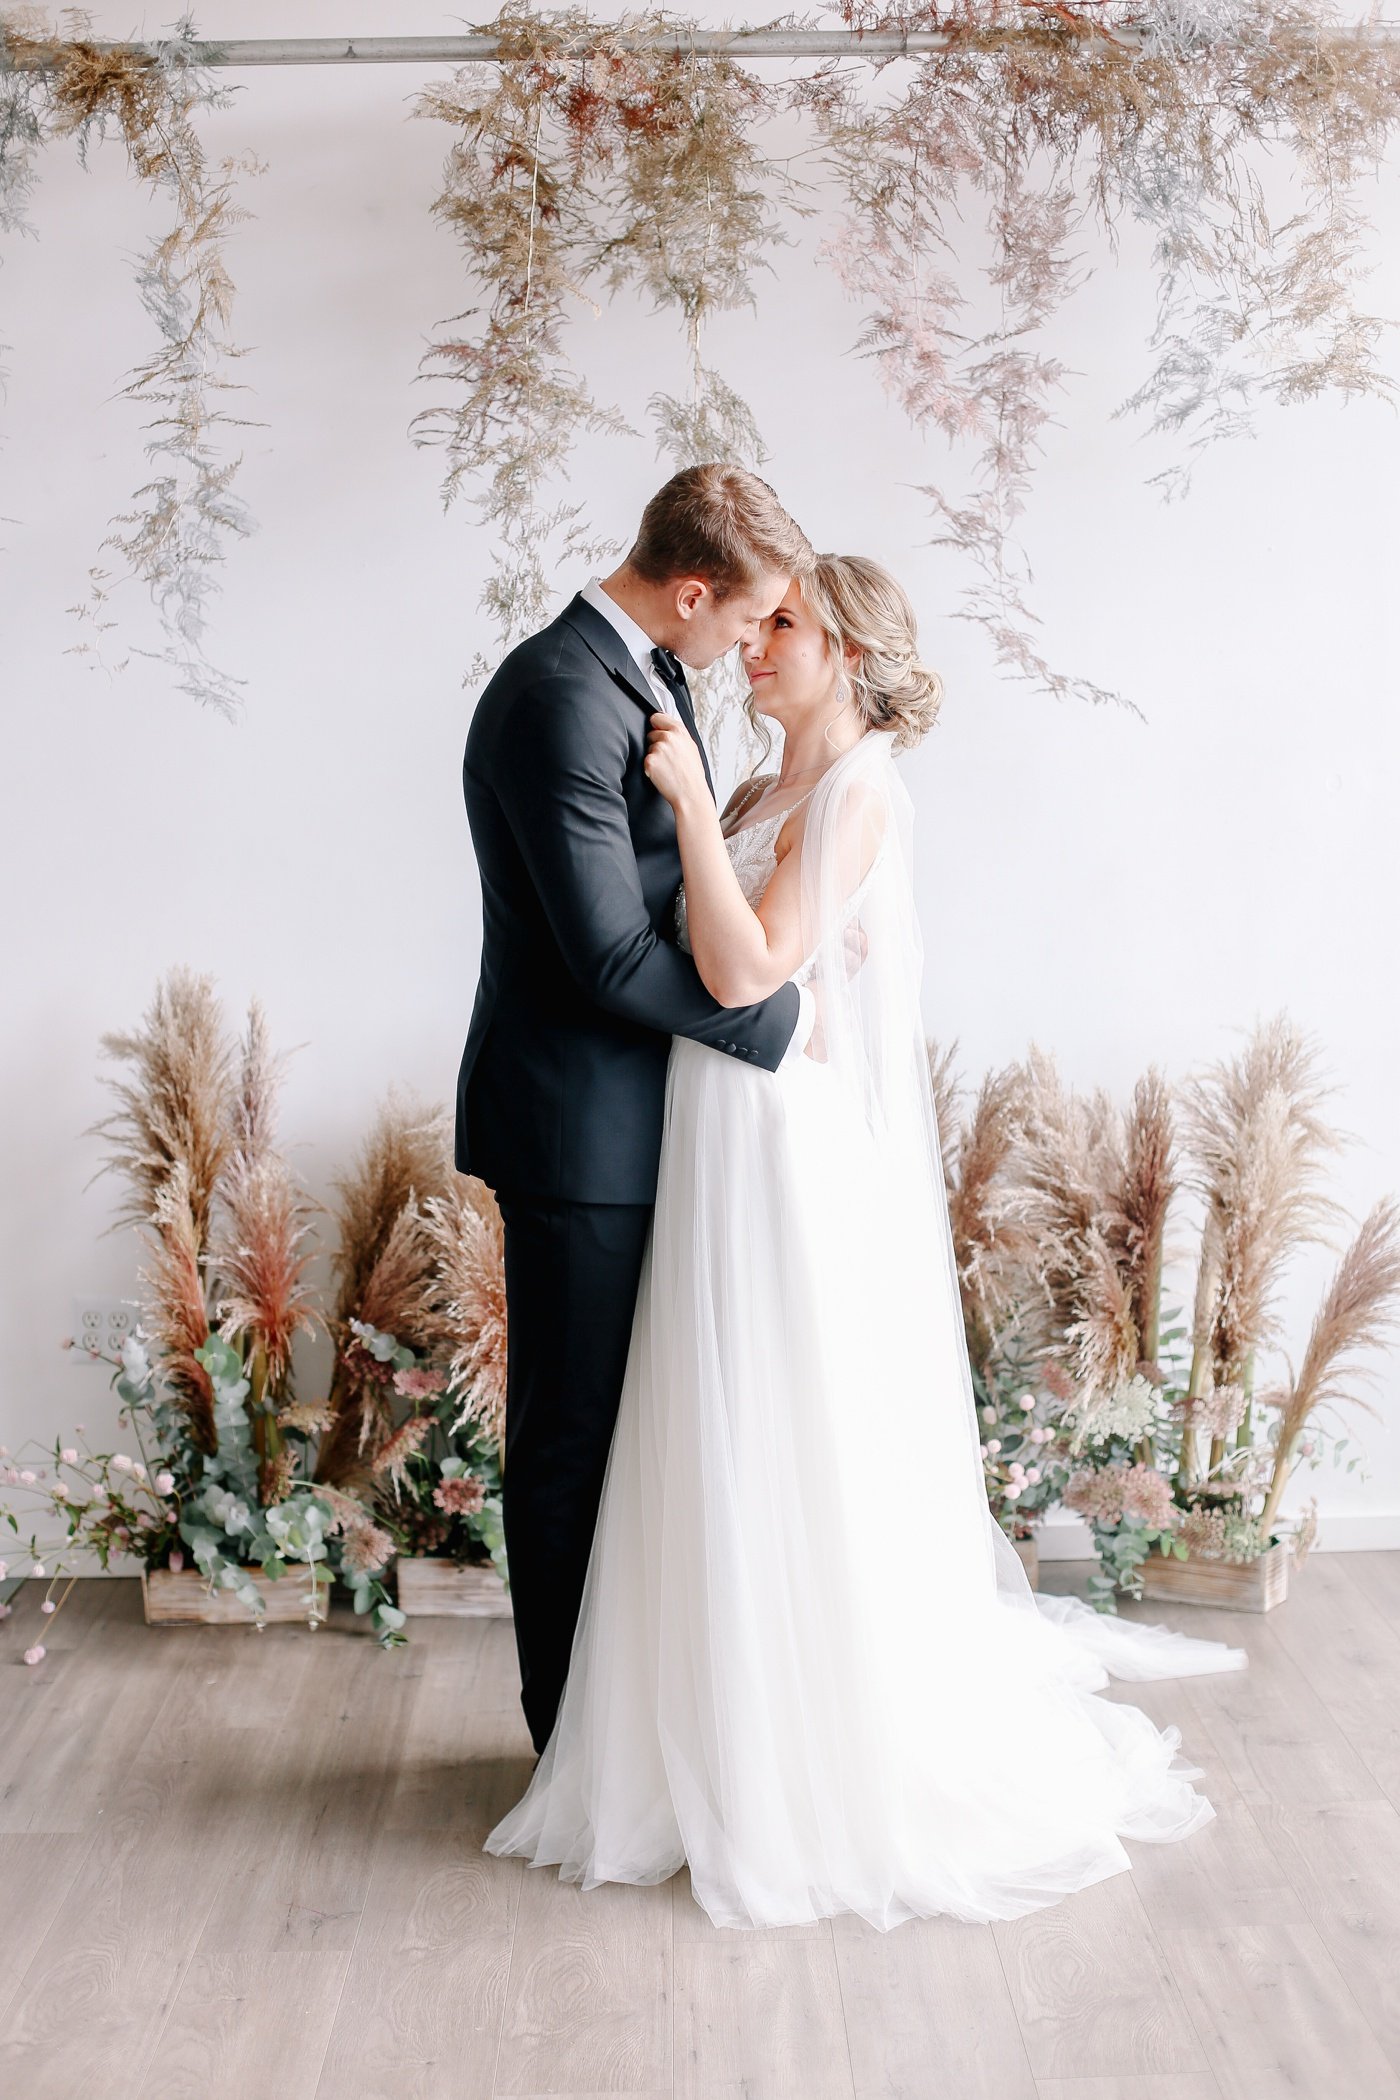 Styled wedding shoot at The Light Room